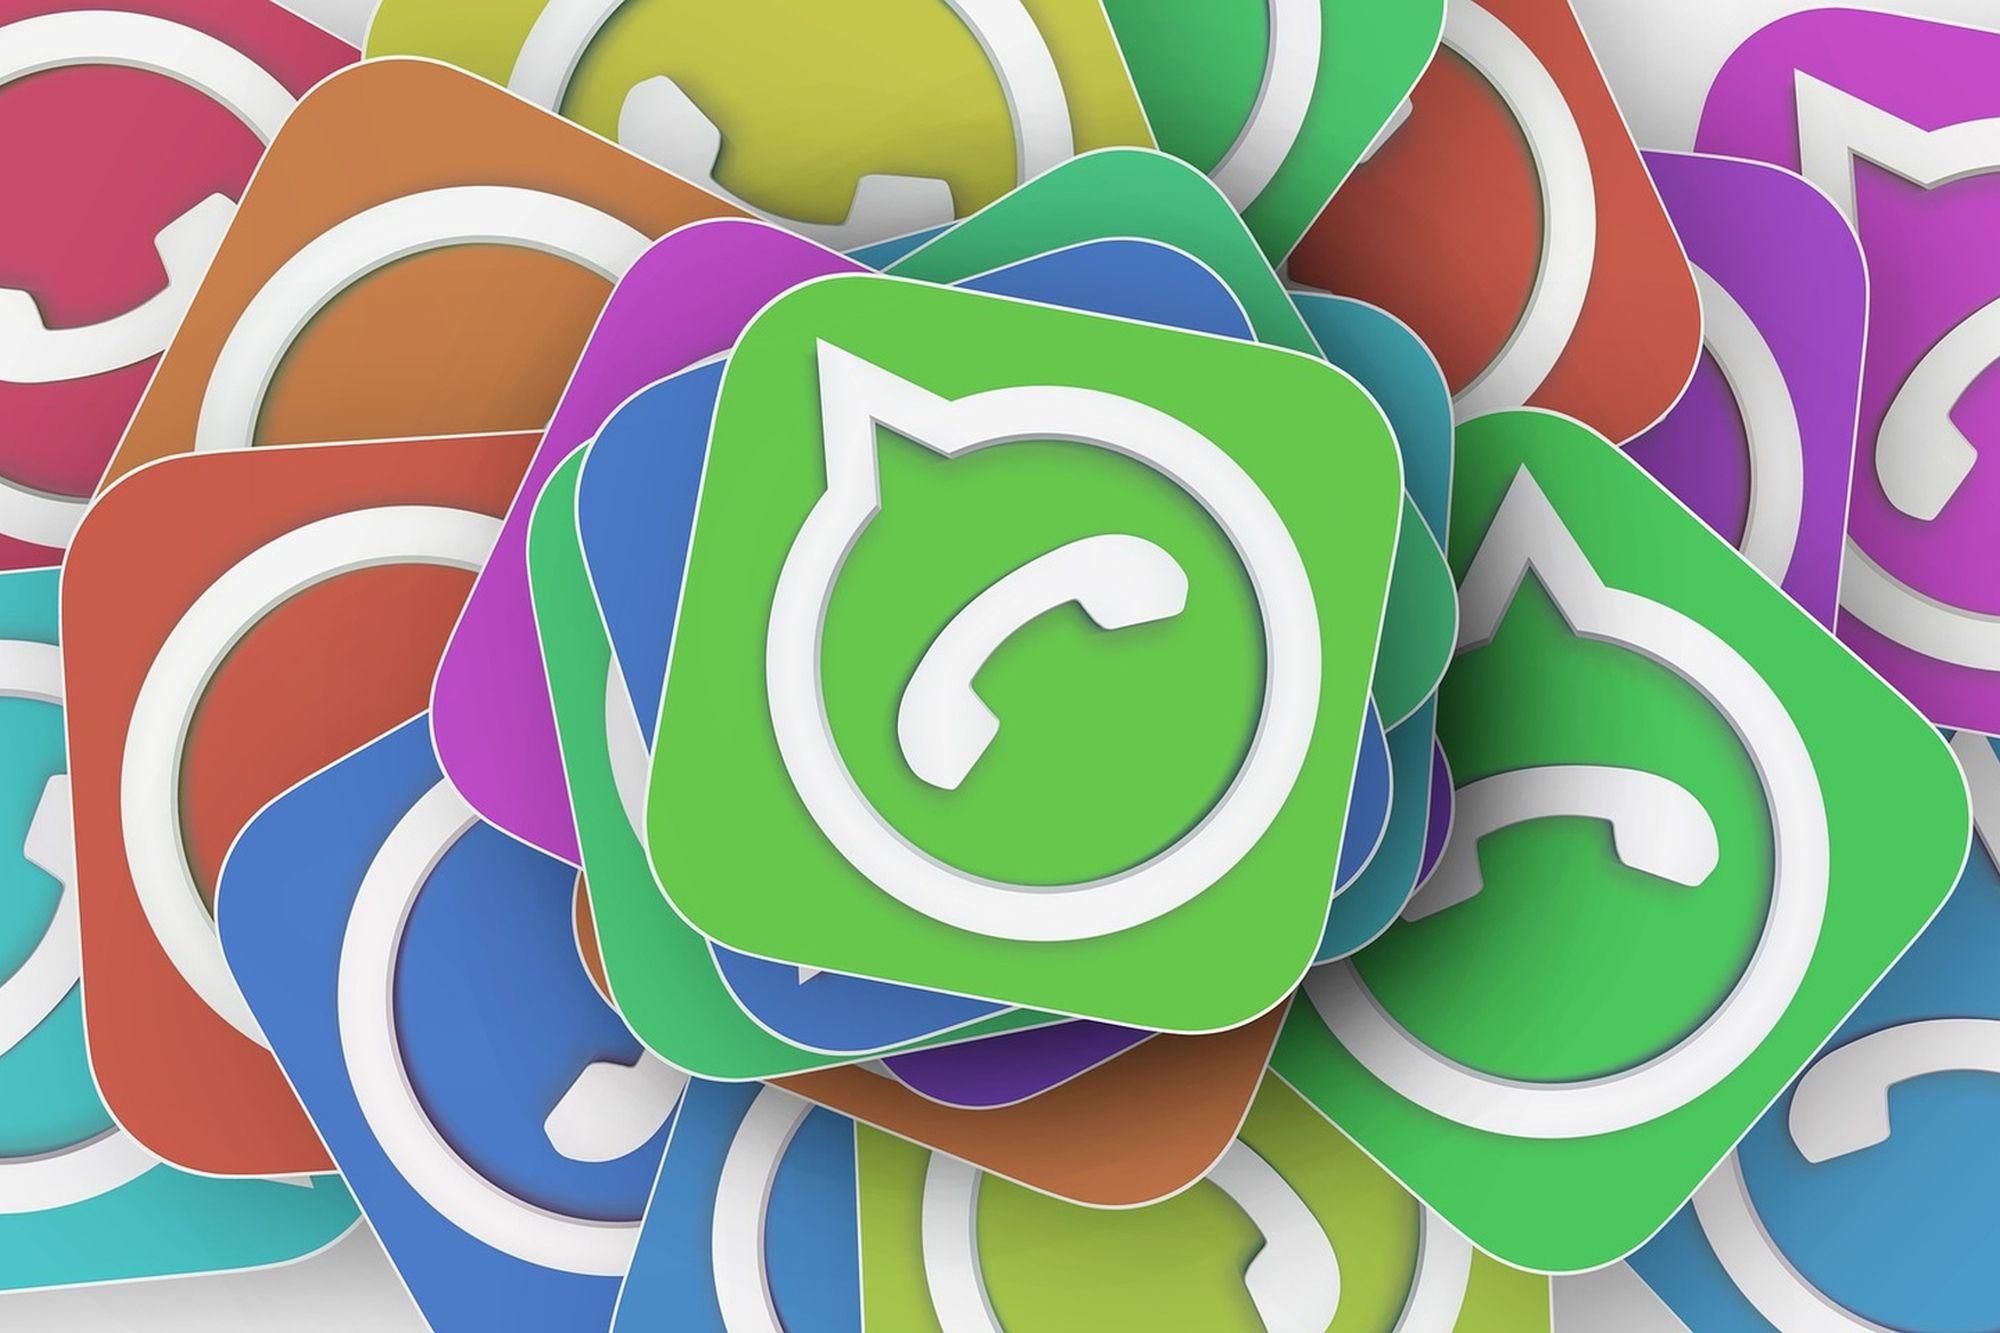 If you are using these apps, you may be leaving WhatsApp